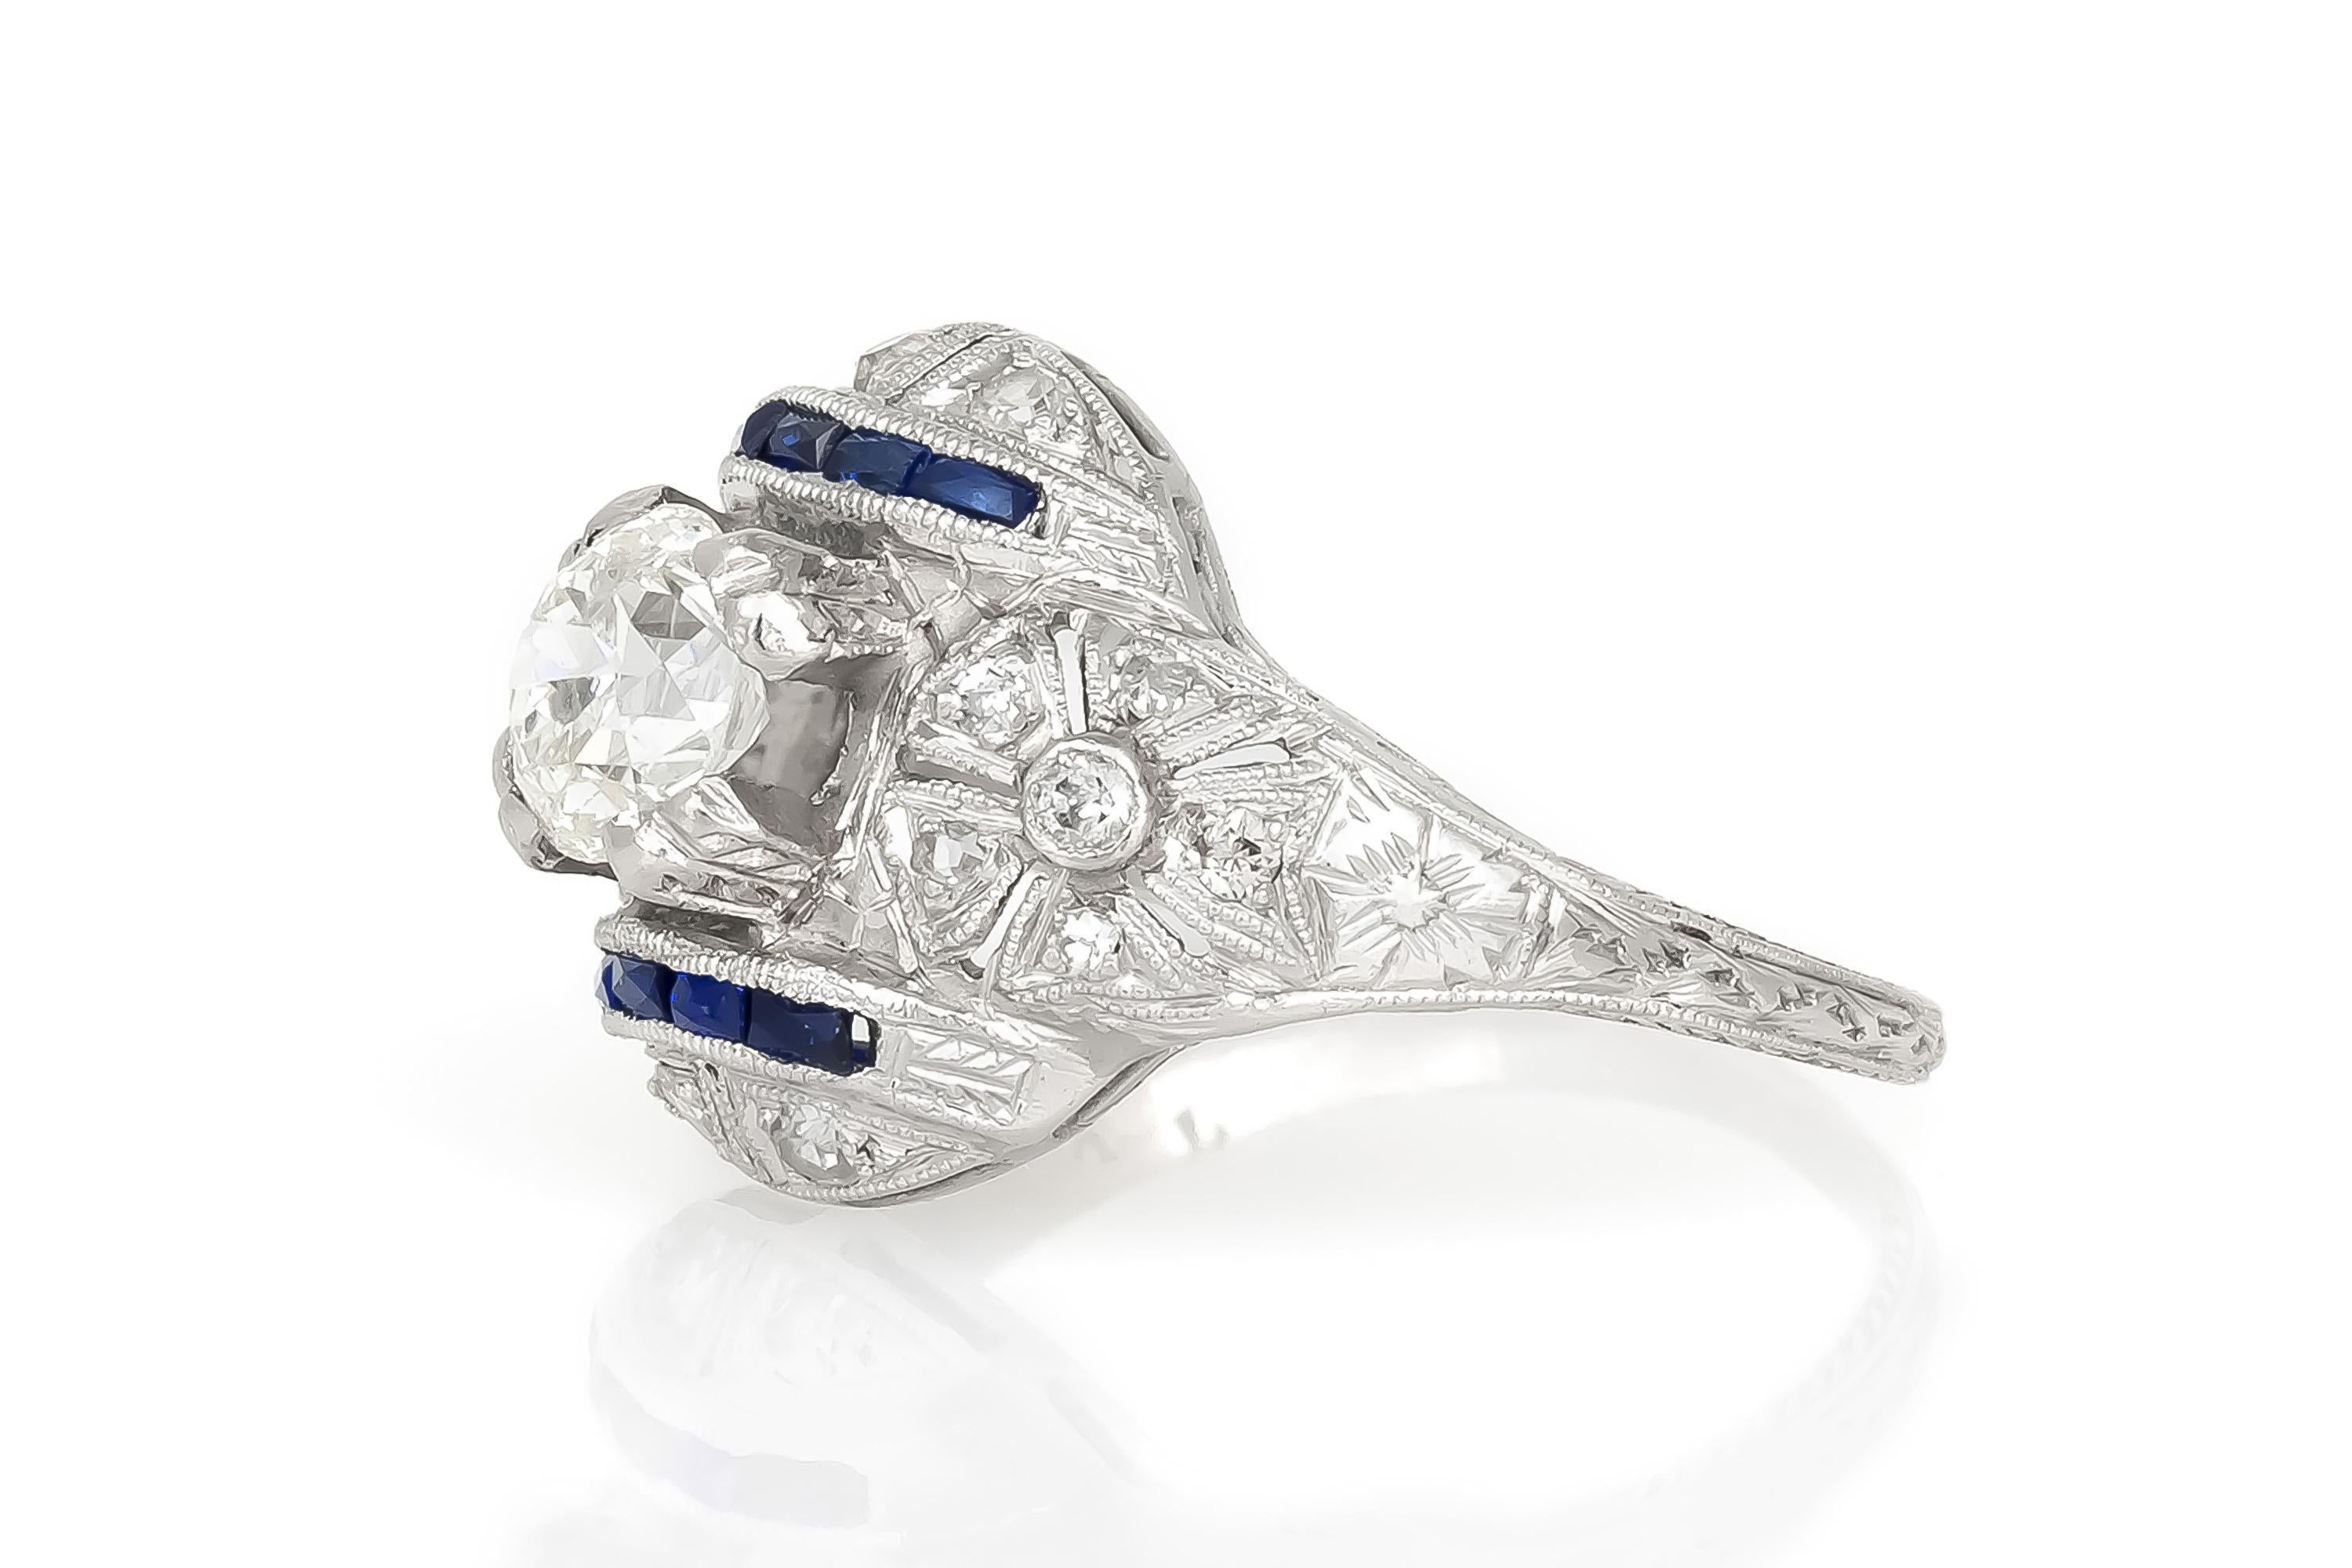 Finely crafted in platinum with an Old European cut Diamond weighing approximately 1.00 carat.
J color, SI2 clarity
The ring features French cut Sapphires and small Diamonds on the setting.
Art Deco, circa 1920s
Size 7, resizable